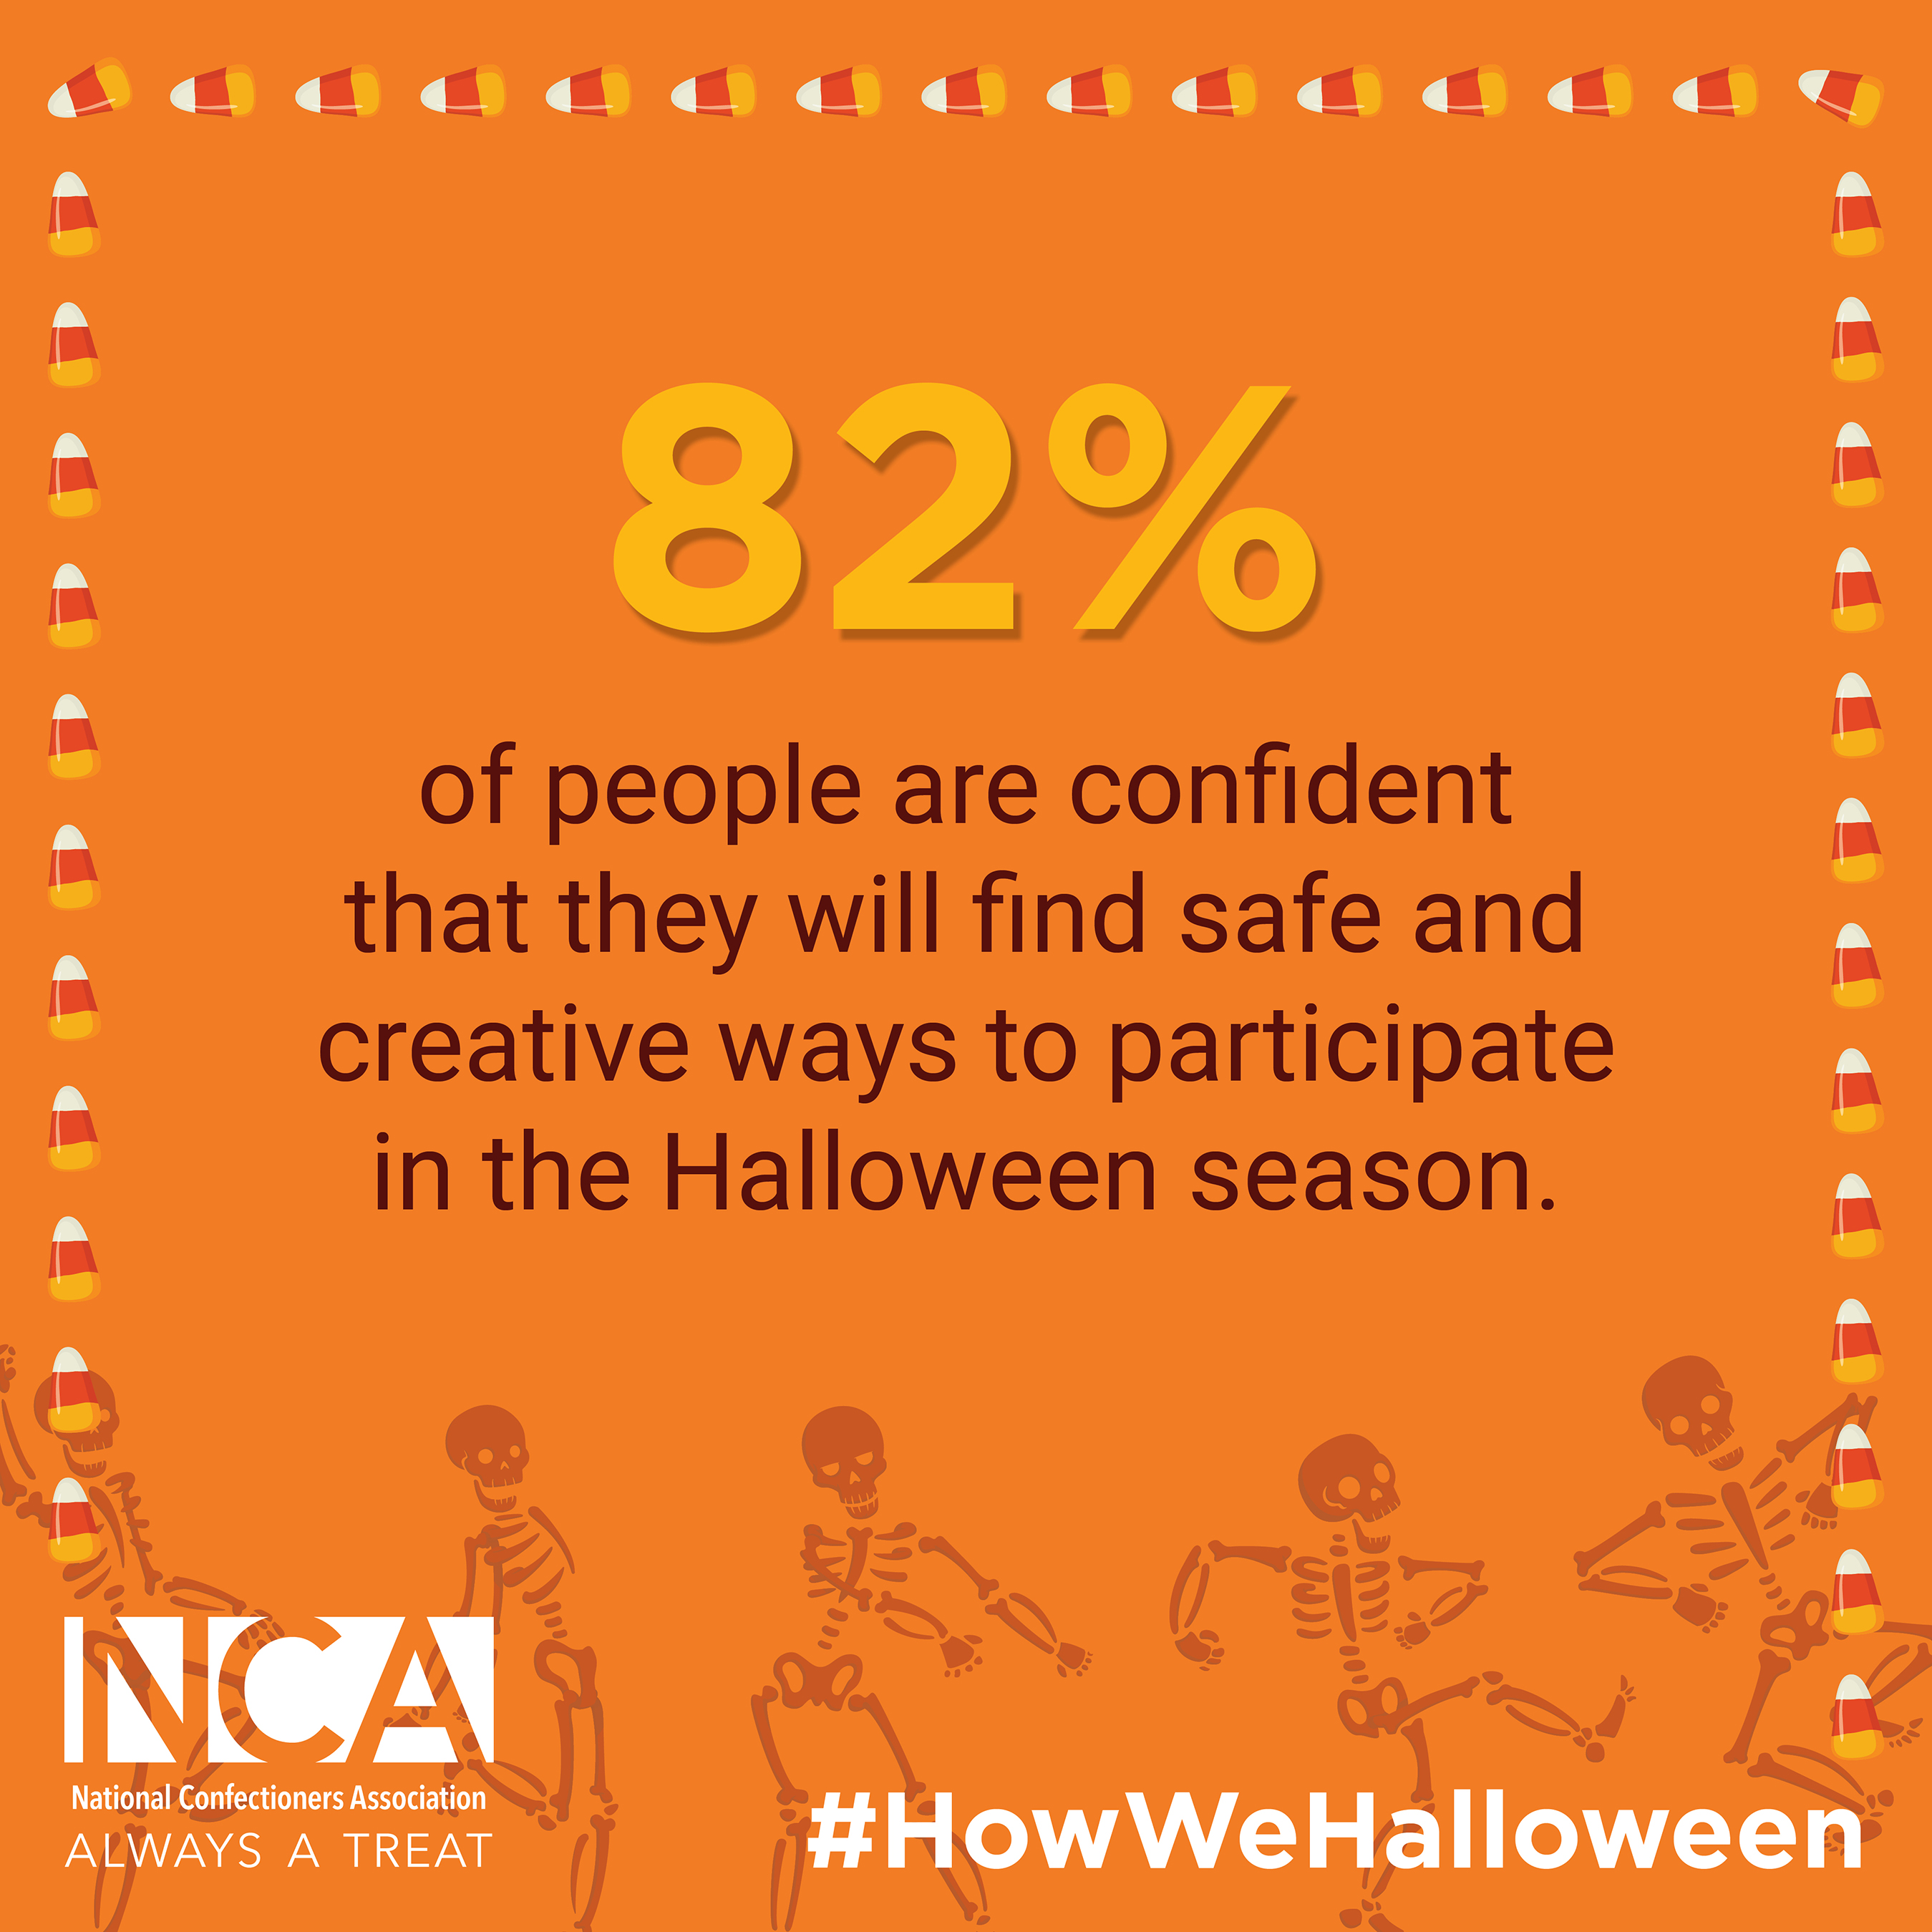 82% of people are confident that they will find safe and creative ways to participate in the Halloween season.